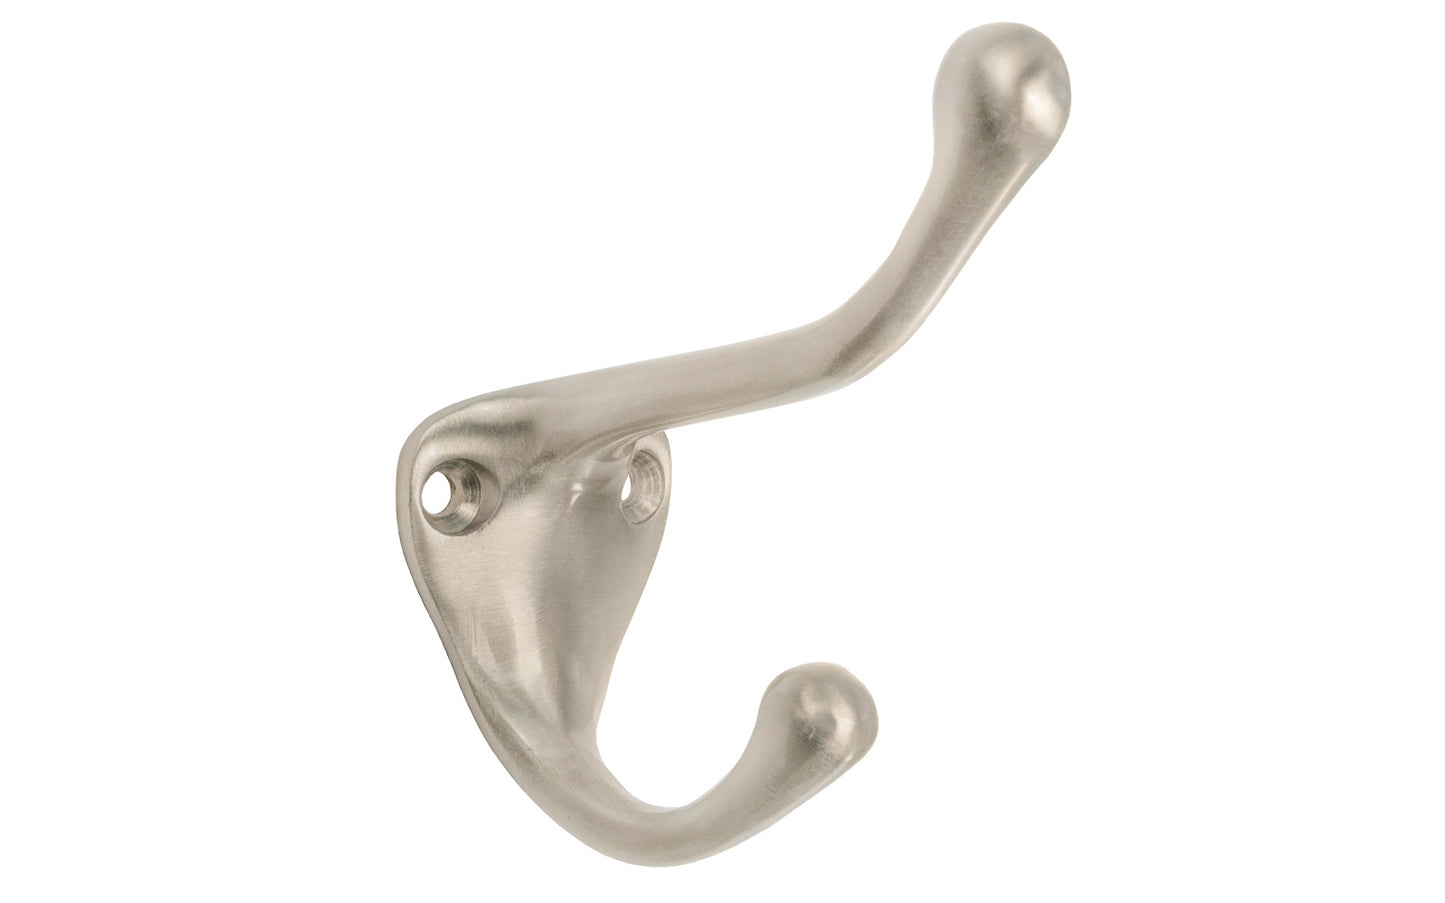 Ives Classic Solid Brass Double Hook. Great for kitchens, bathrooms, hallways, furniture, cabinets, bedrooms. The two prong hook is made of solid brass material, making it durable for clothing, towels, bags. Hat & Coat Hook. Satin Nickel Finish.